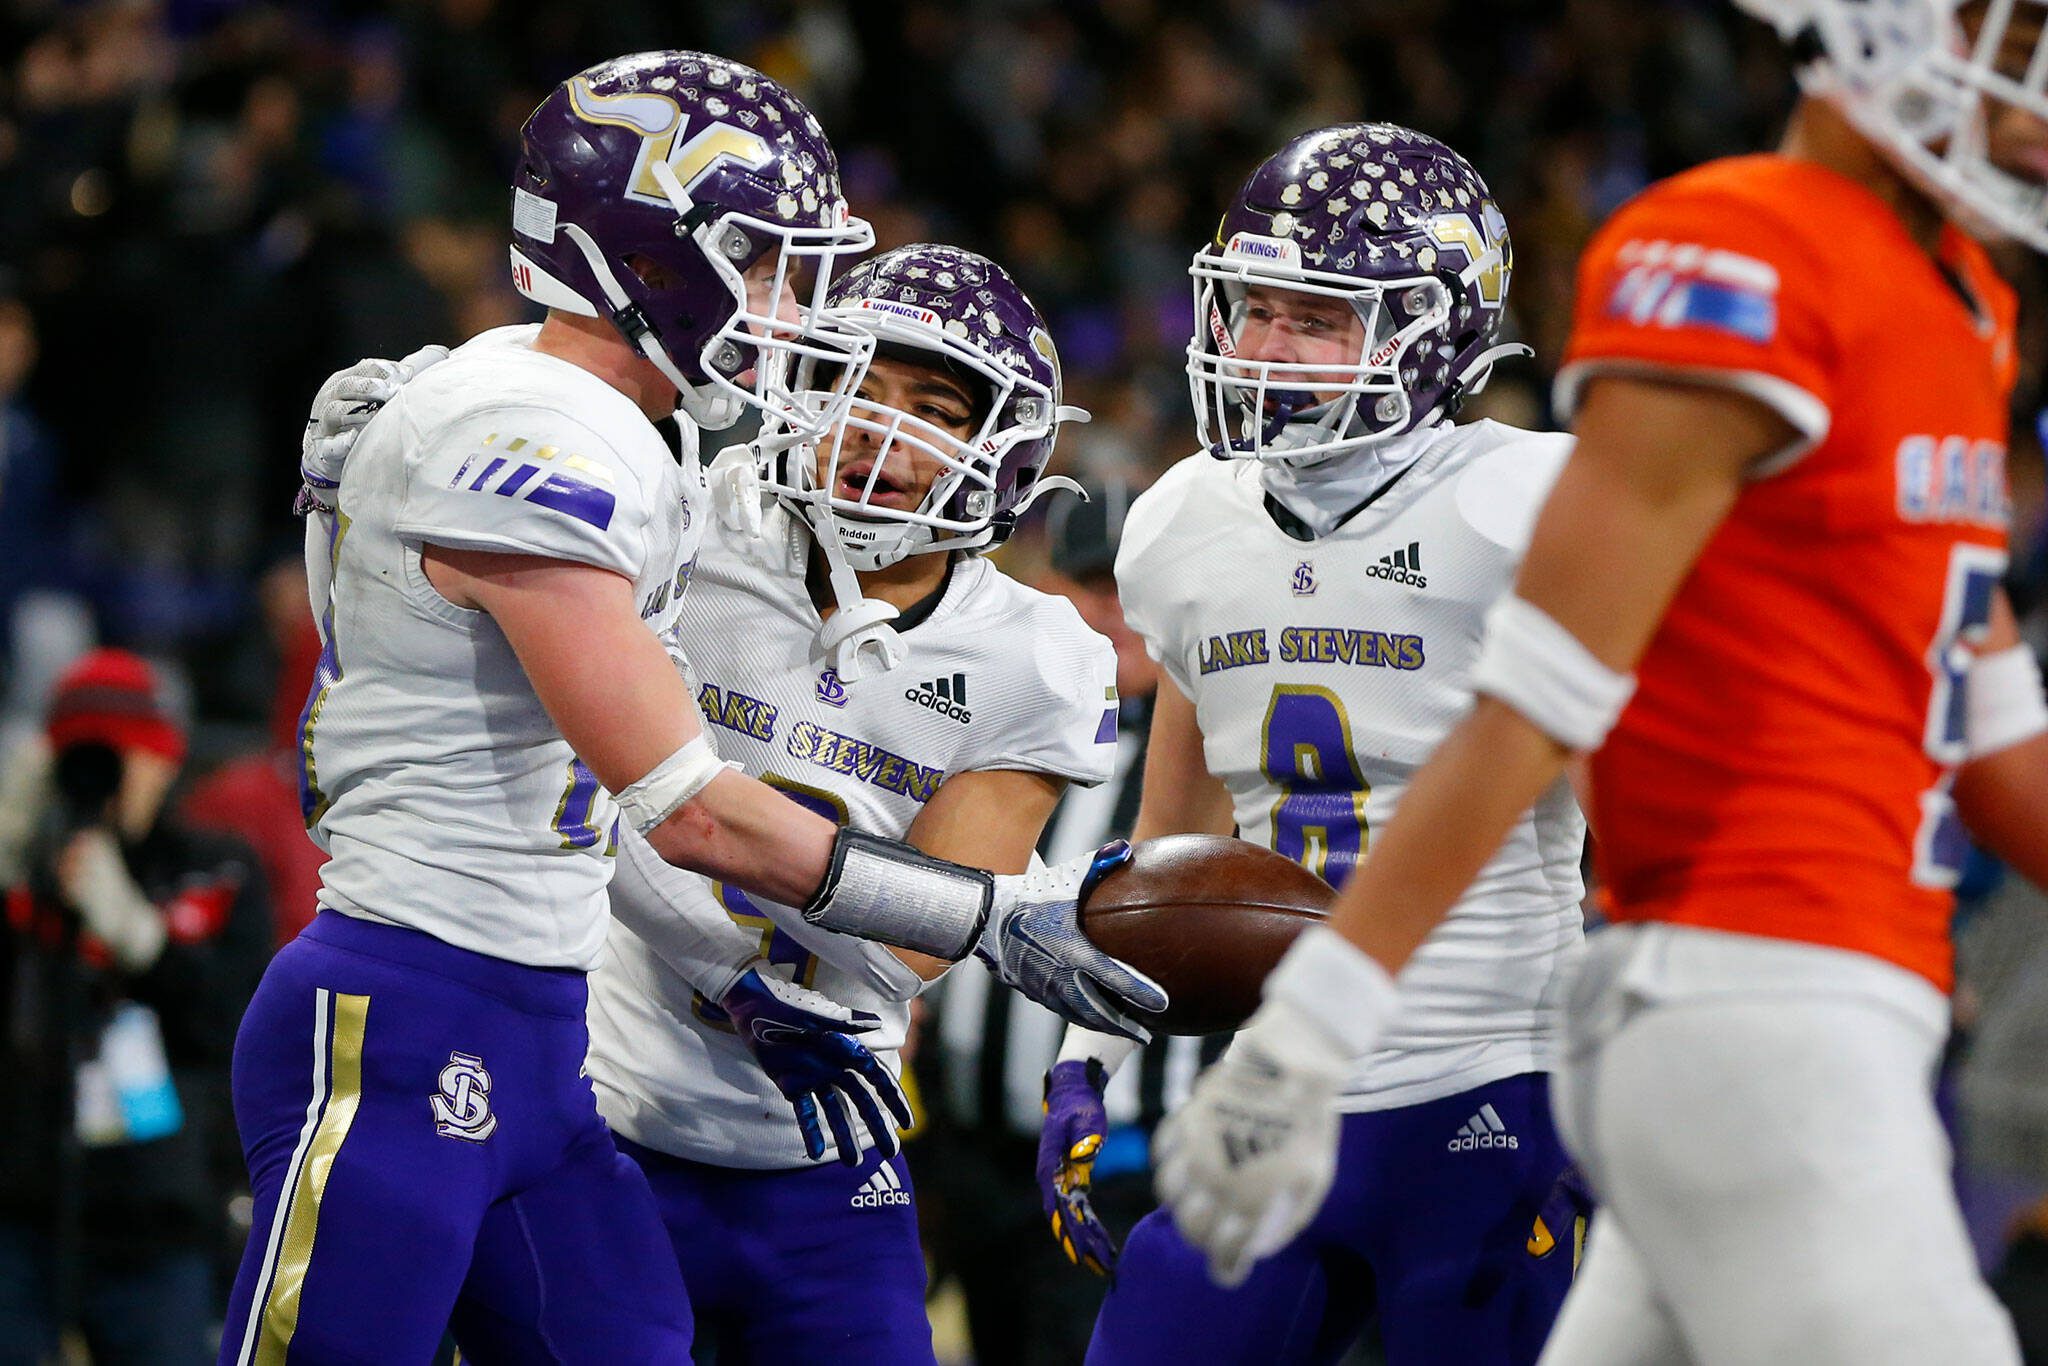 Lake Stevens players celebrate Jesse Lewis’ second-half touchdown against Graham-Kapowsin during the Class 4A state championship on Saturdayat Husky Stadium in Seattle. (Ryan Berry / The Herald)